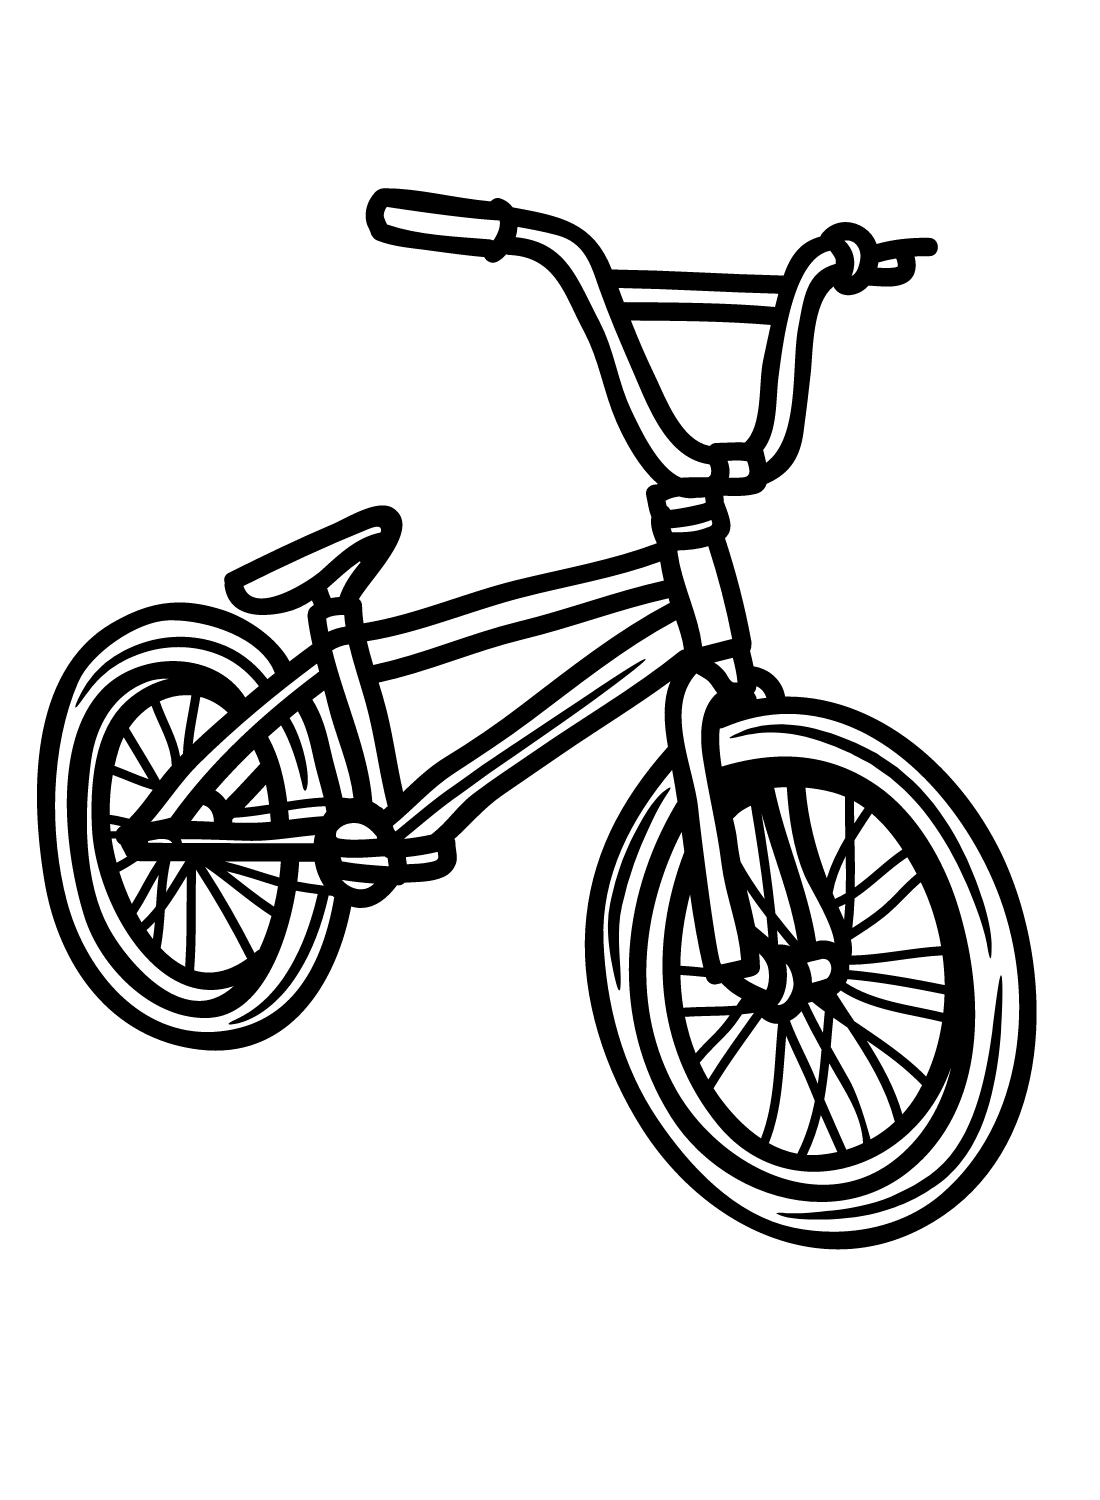 Bicycle for Children Coloring Page